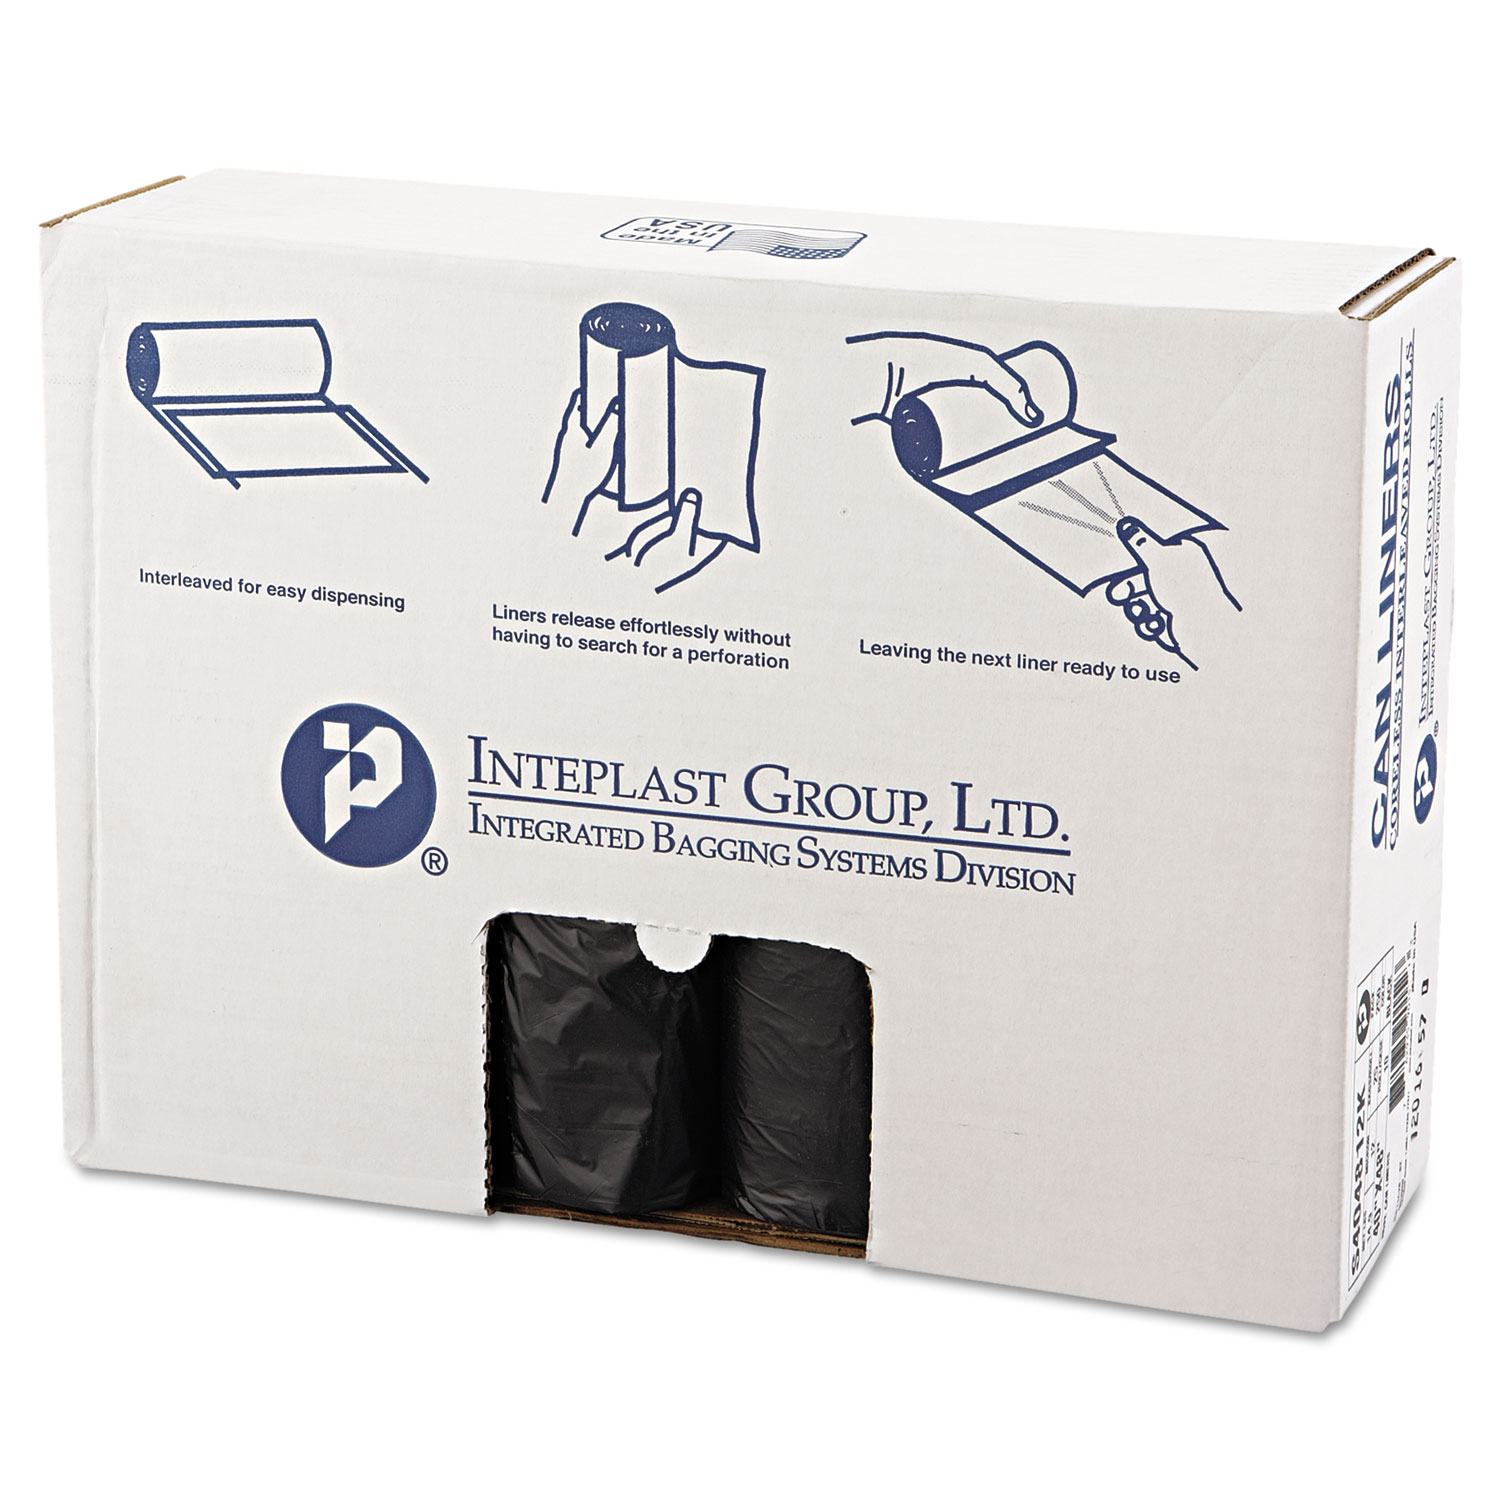 Commercial Can Liners, Plastic Can Liners & Industrial Trash Bags